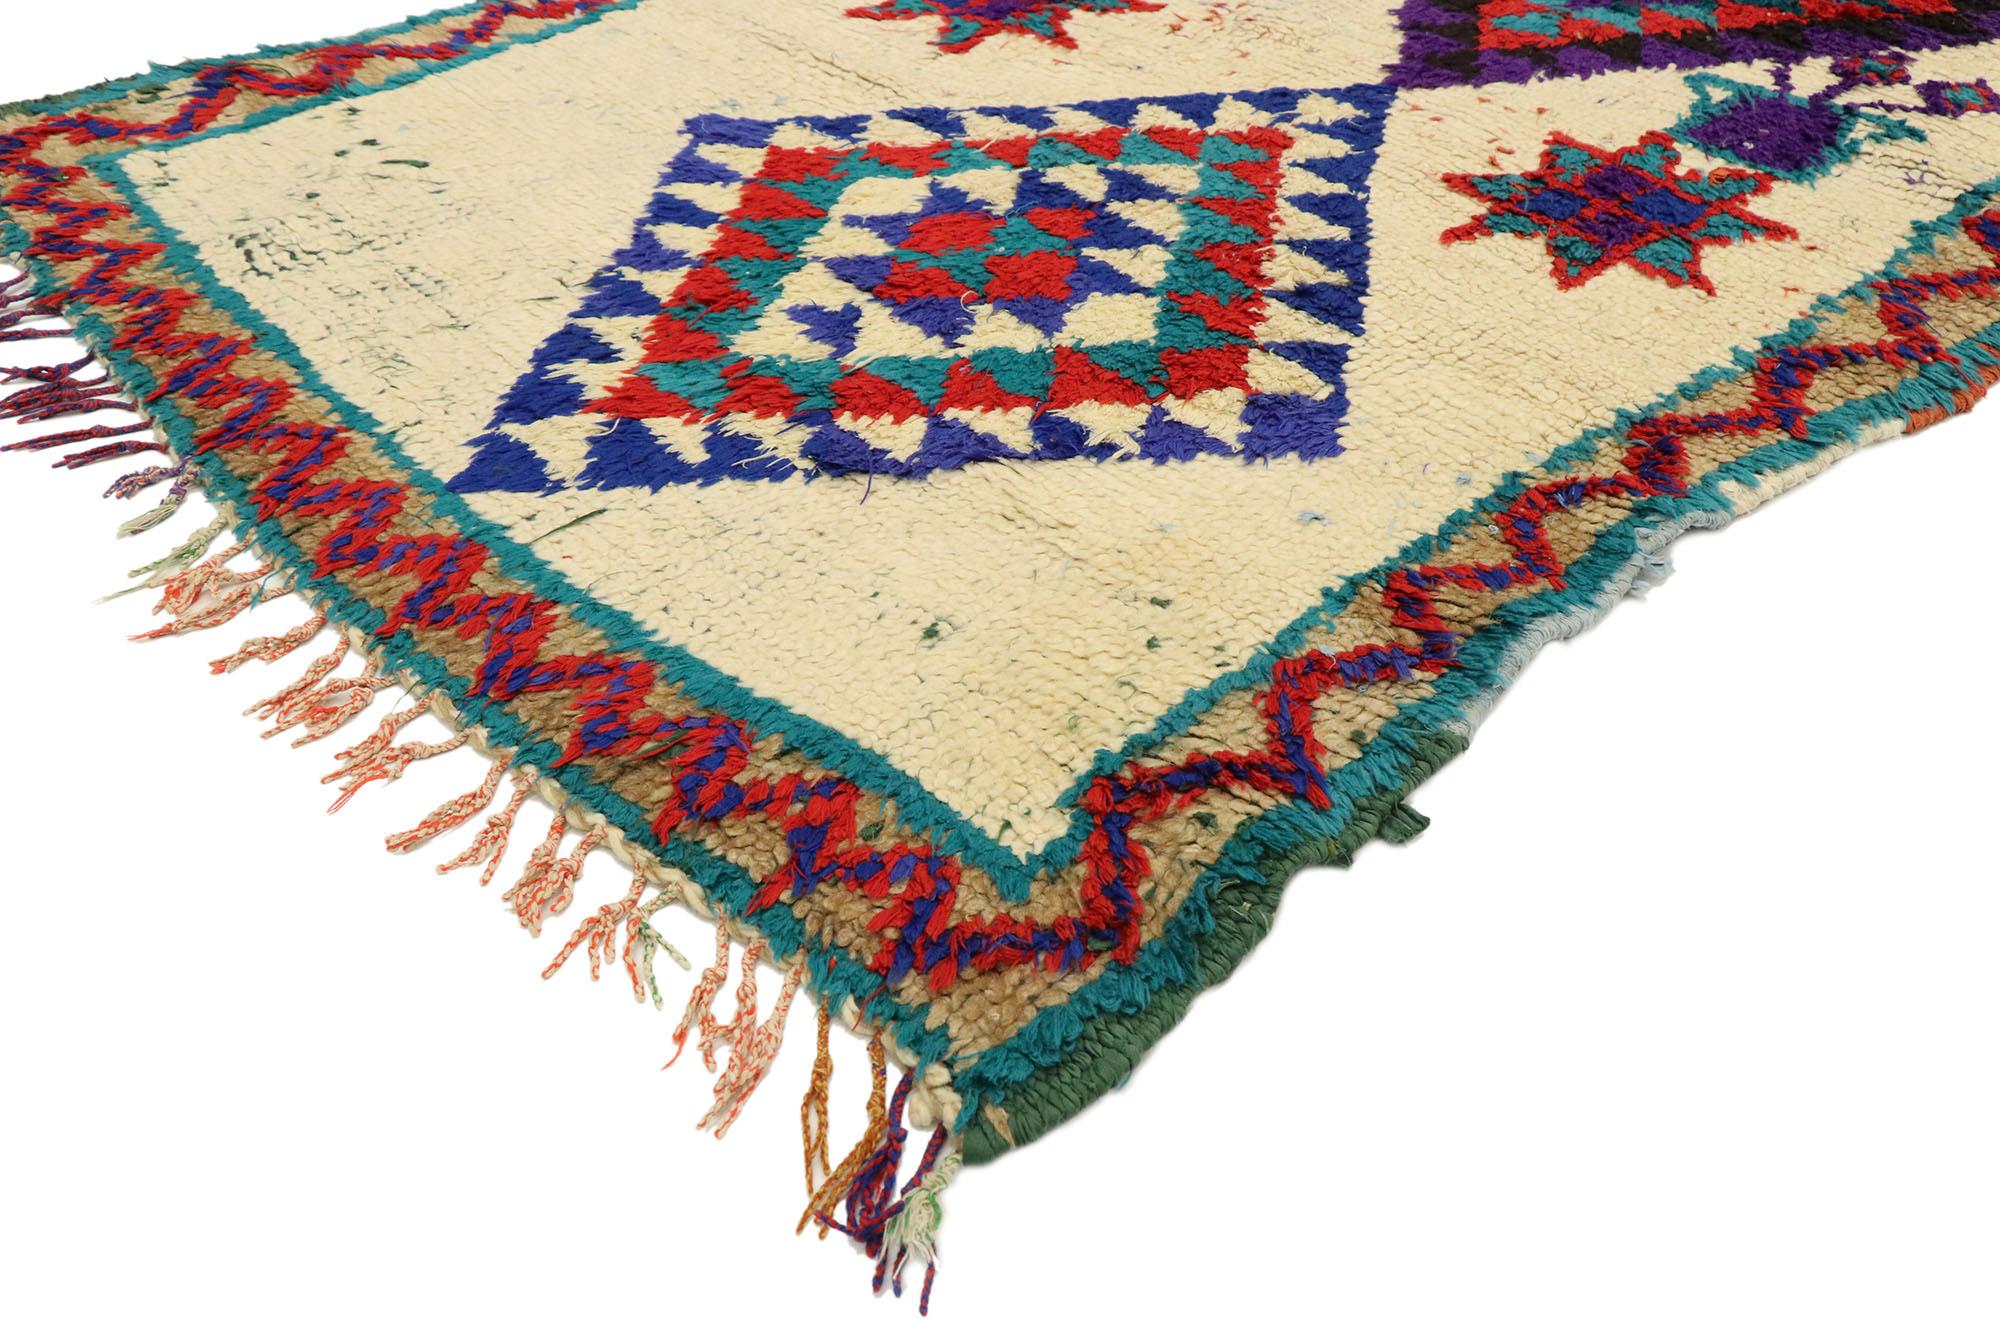 20627 vintage Berber Moroccan Boucherouite Azilal rug with Tribal style, Shag Hallway runner. This hand knotted wool and cotton vintage Berber Moroccan rug features three lozenge diamonds along the center flanked with eight-point stars and